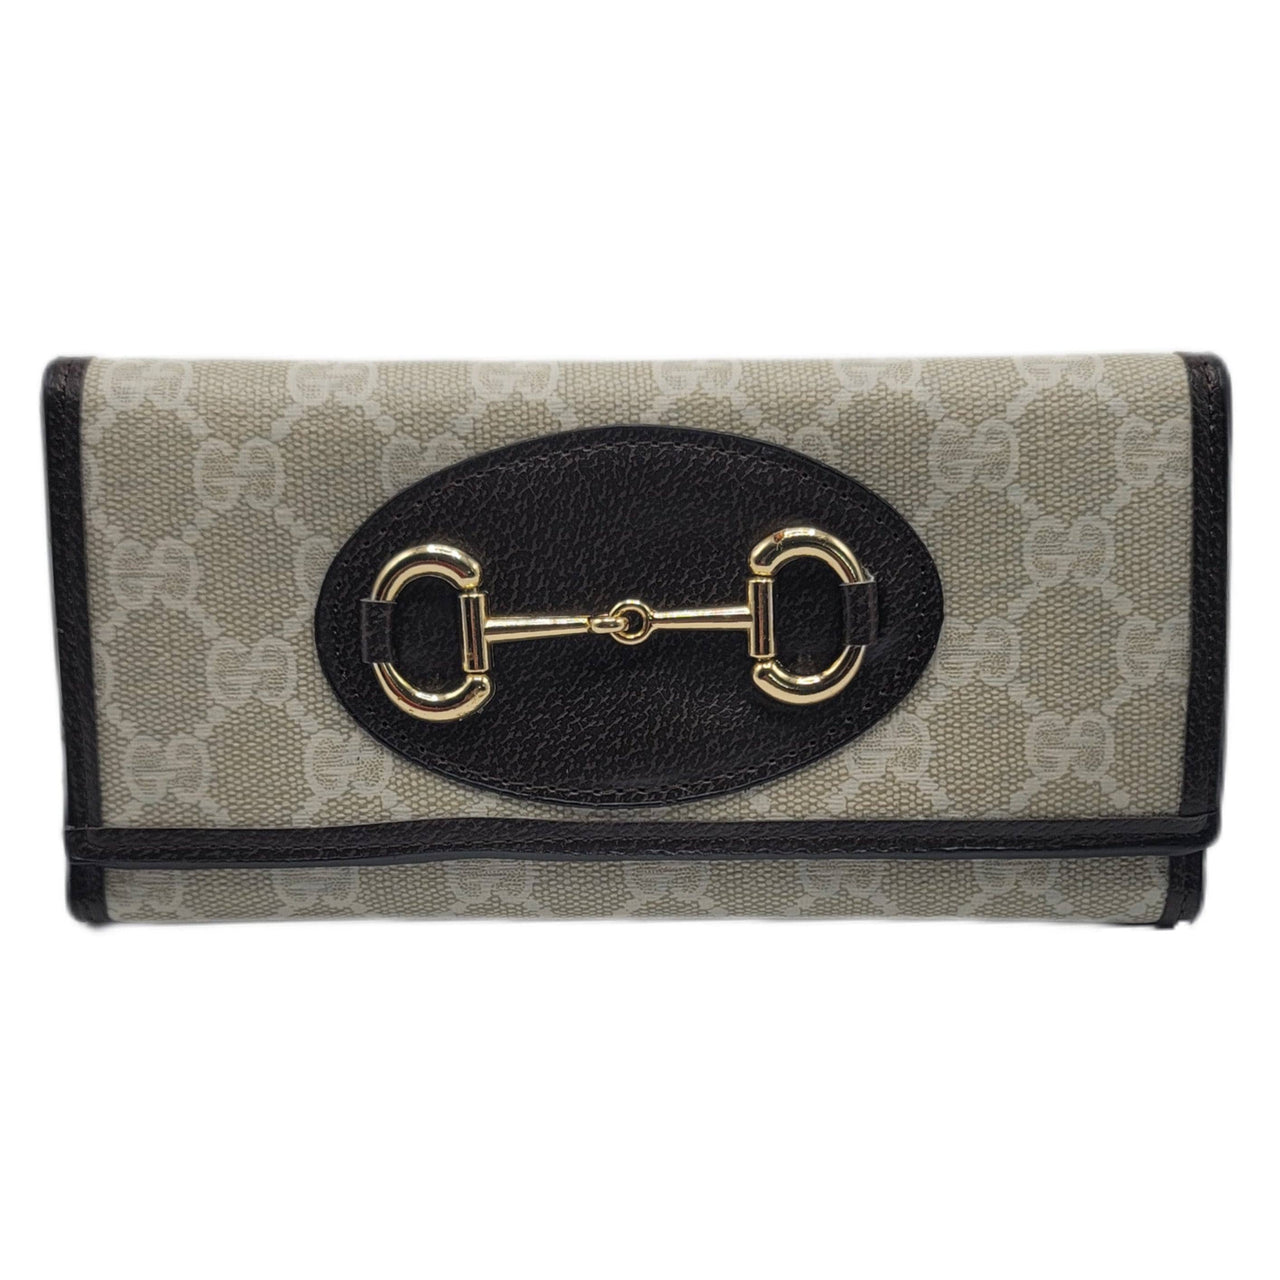 The Bag Couture Luggage & Bags Gucci 3 Fold Wallet Classic Cuffs